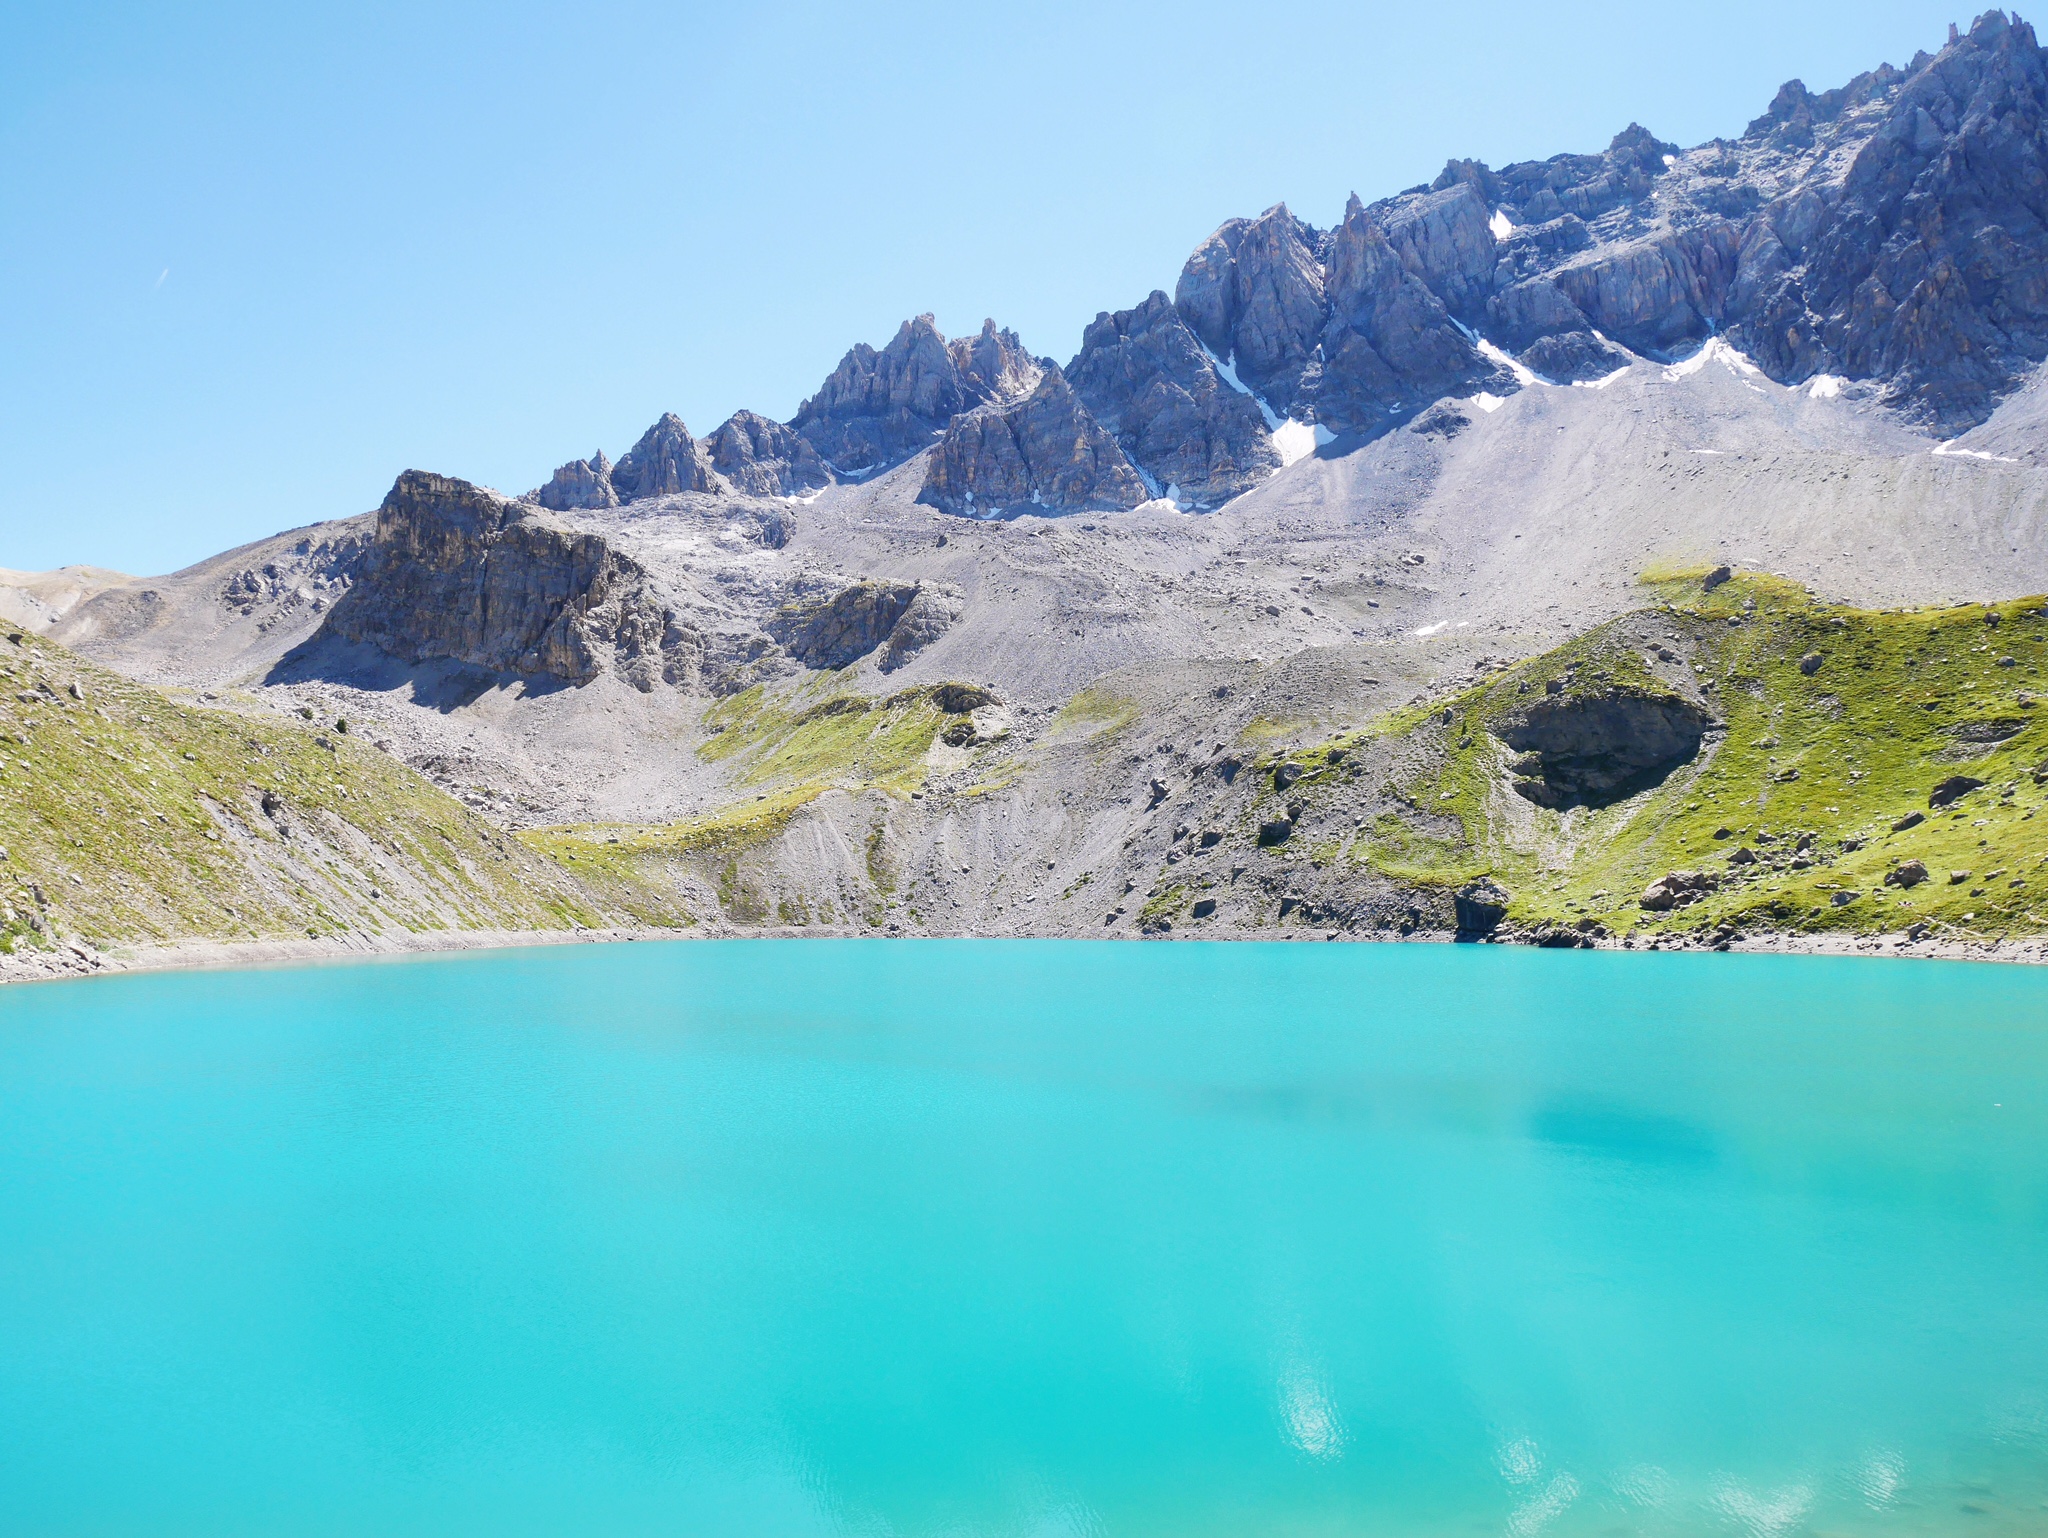 Serenity - Hike to Lac Sainte-Anne - French Alps - France